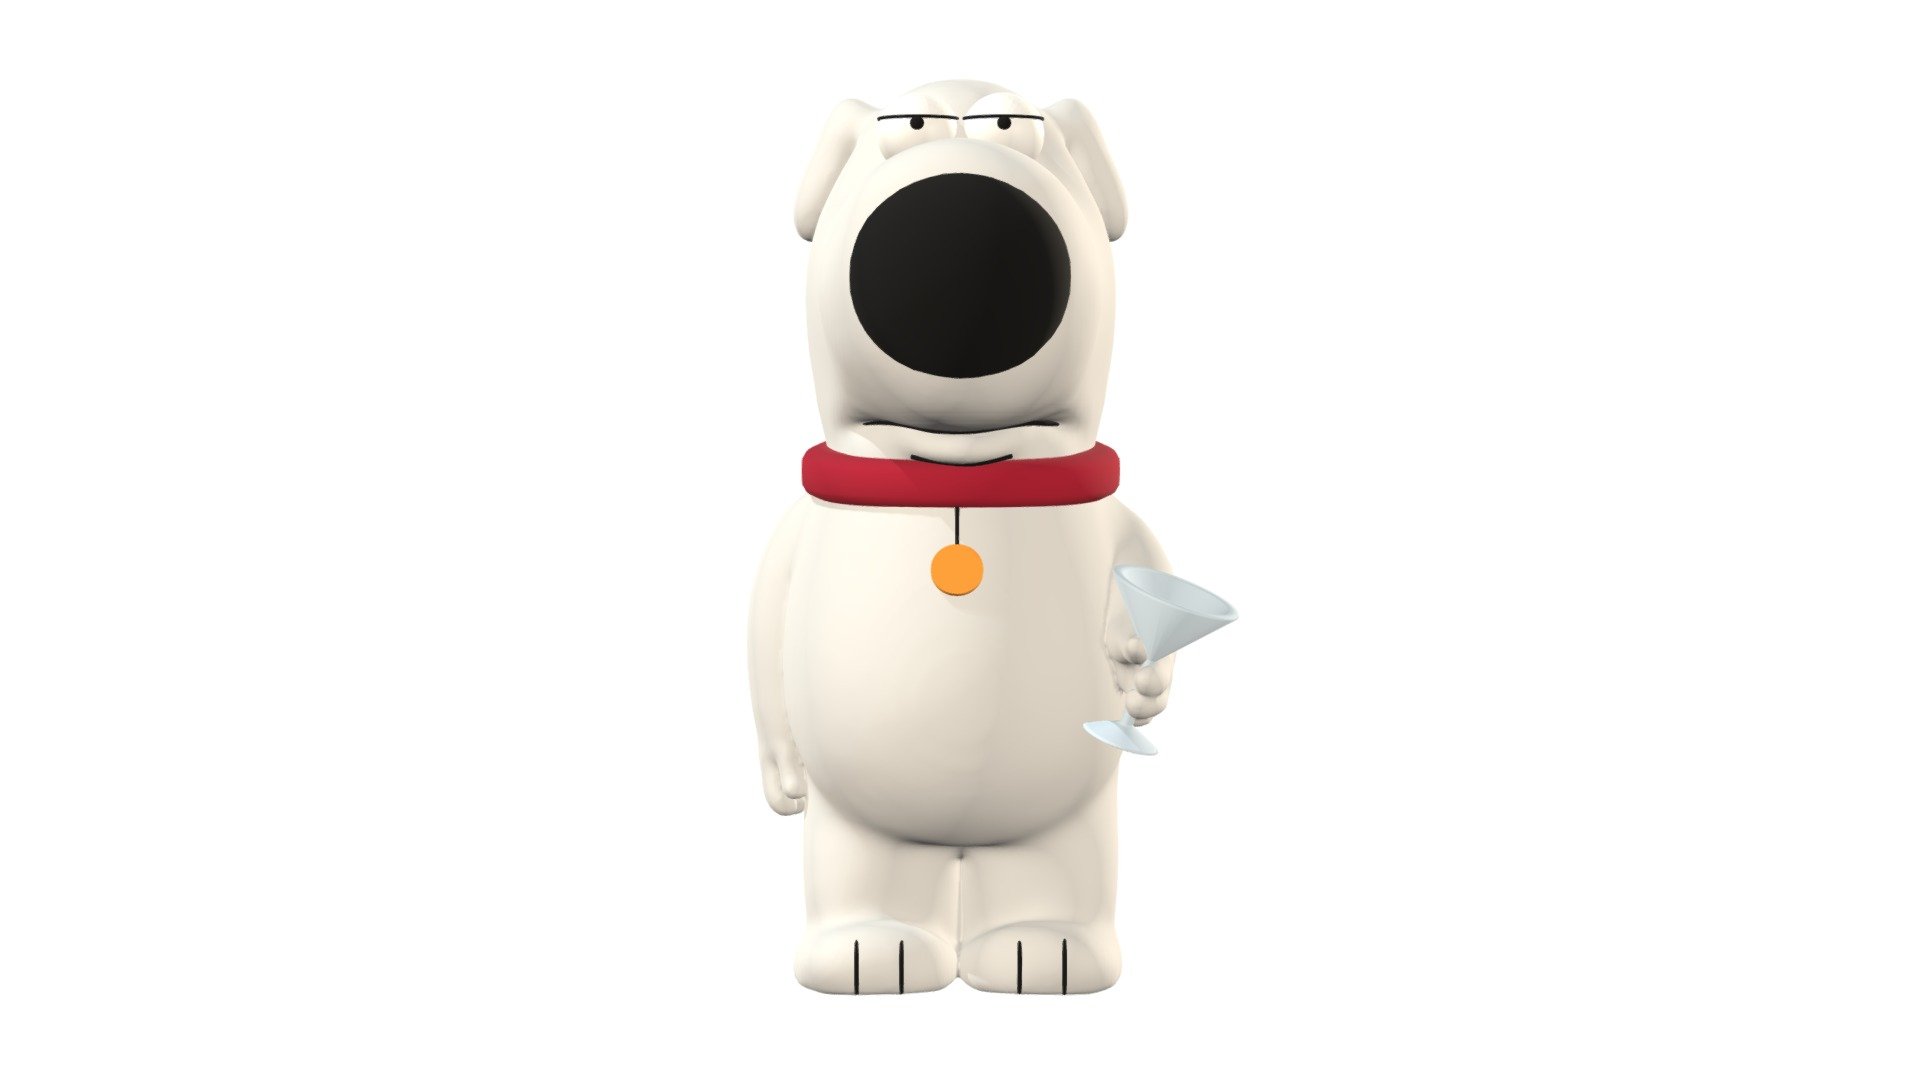 Brian Griffin is an 8-year old talking white Labrador who has lived with the Griffin family since Peter picked him up as a stray as shown in &ldquo;Brian: Portrait of a Dog